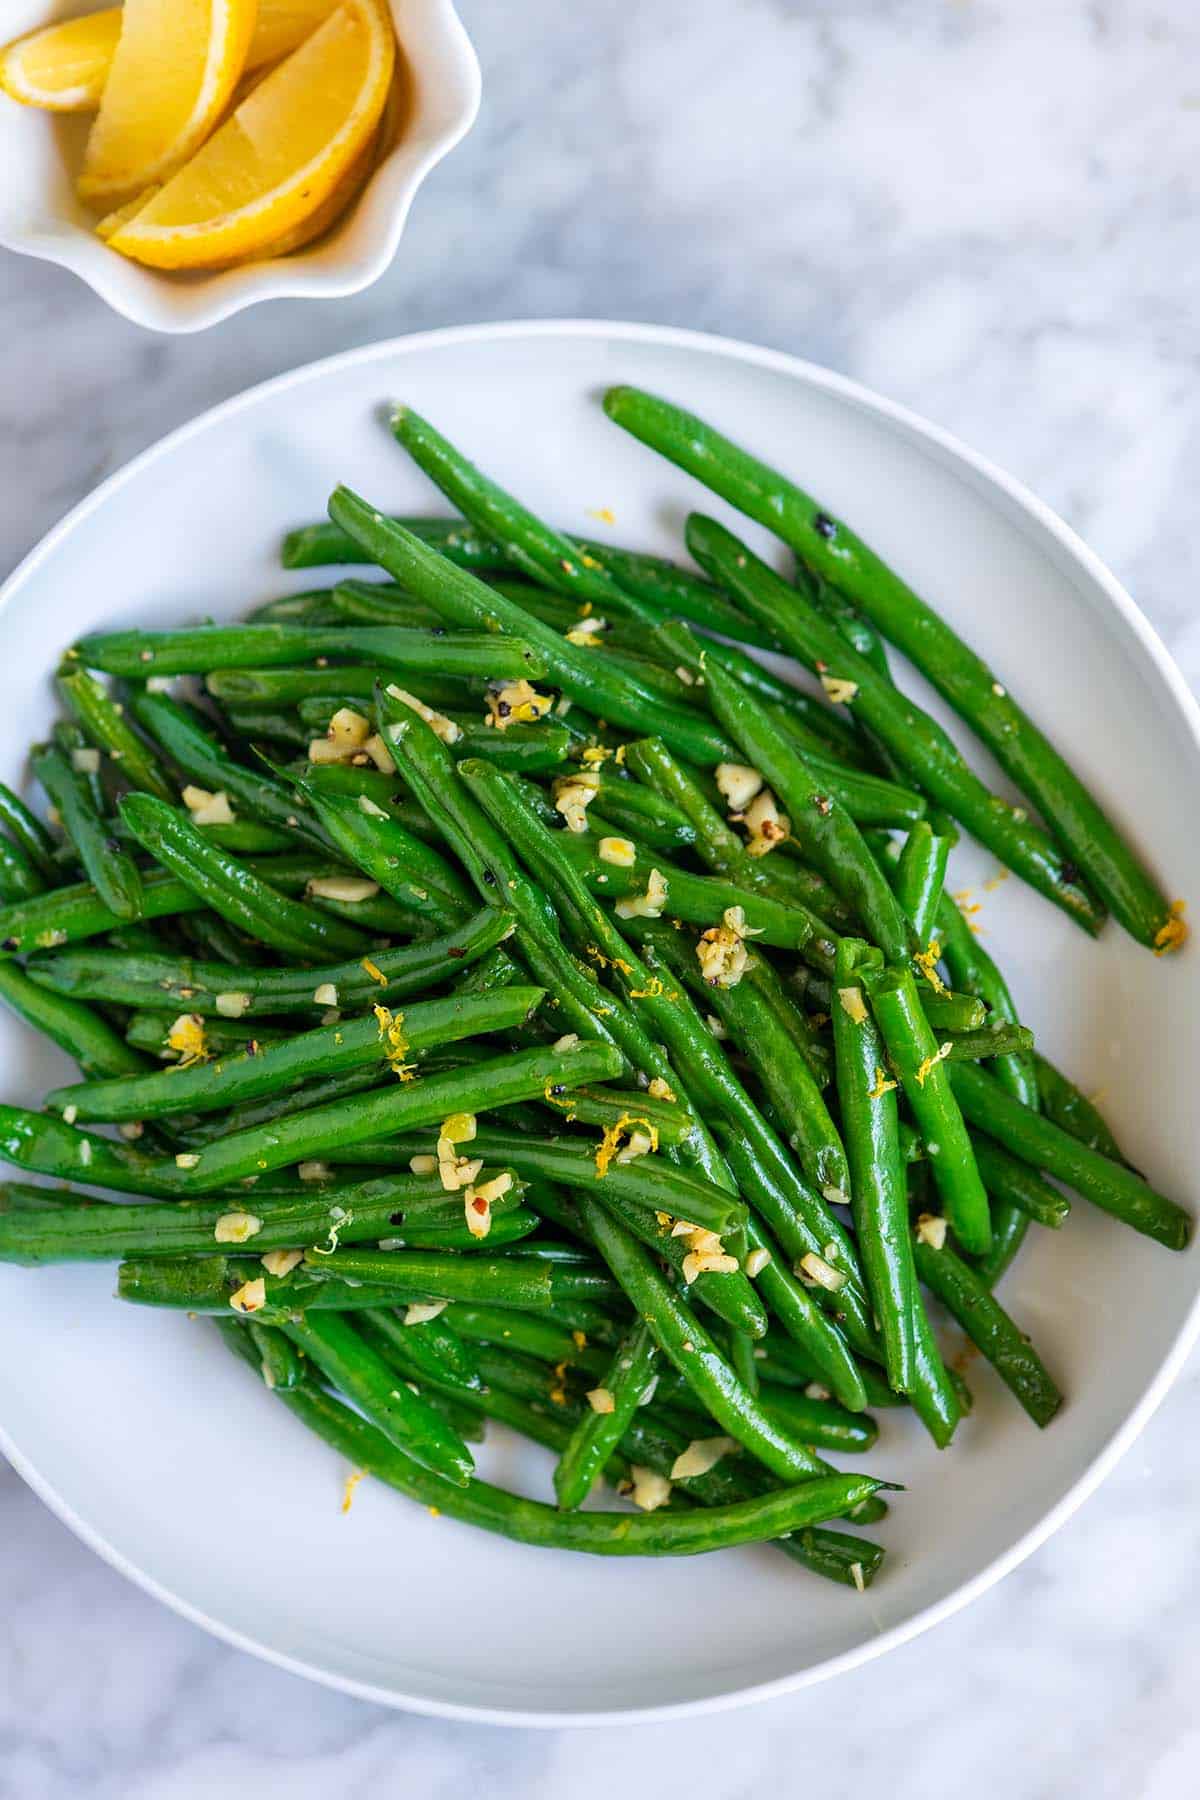 A bowl of sauteed green beans with lemon and garlic